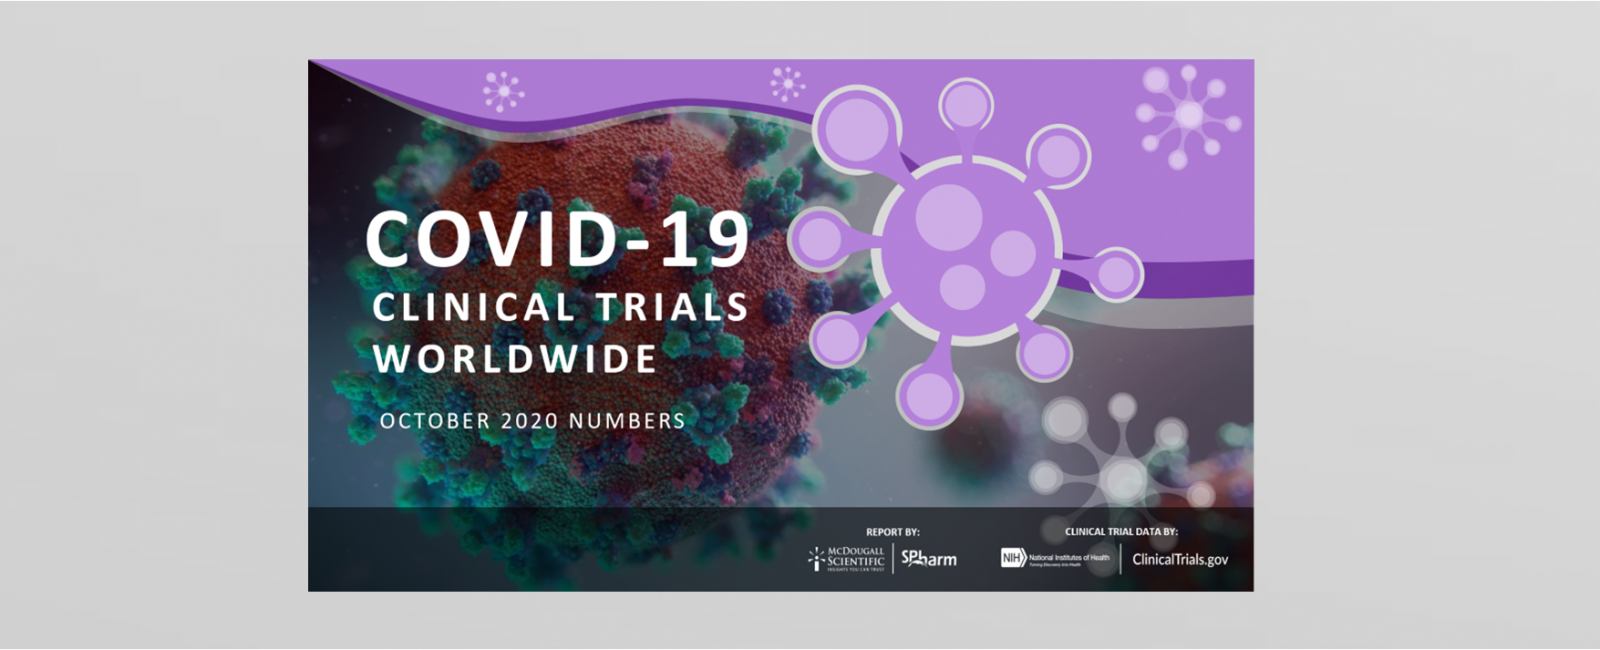 Covid-19 Clinical Trials Worldwide numbers for October 2020